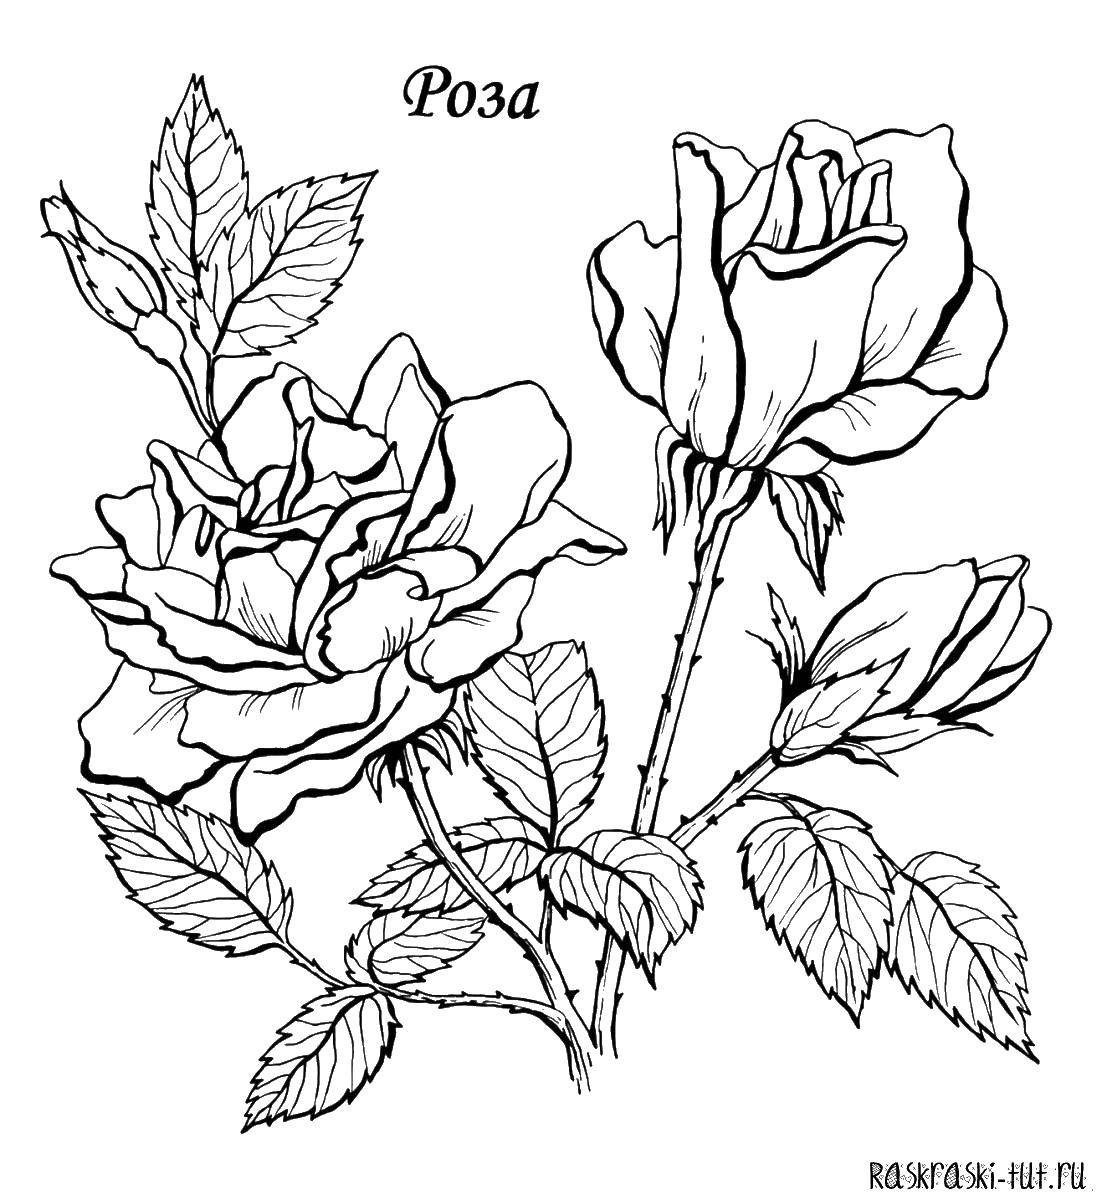 Coloring Roses with thorns. Category flowers. Tags:  rose, thorns, leaves.